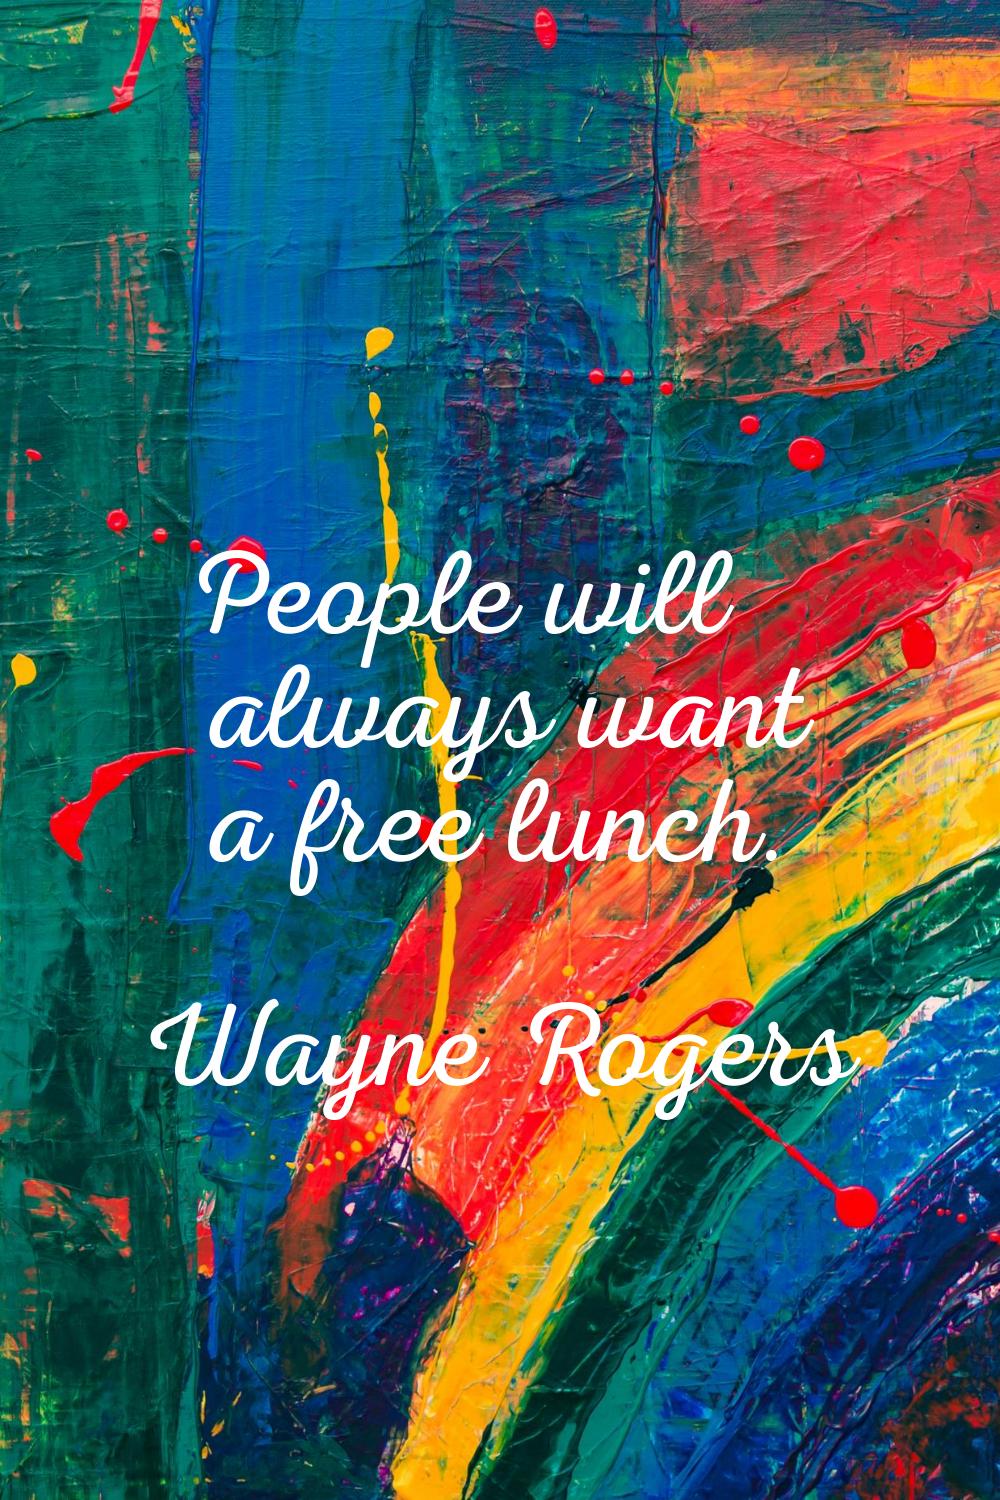 People will always want a free lunch.